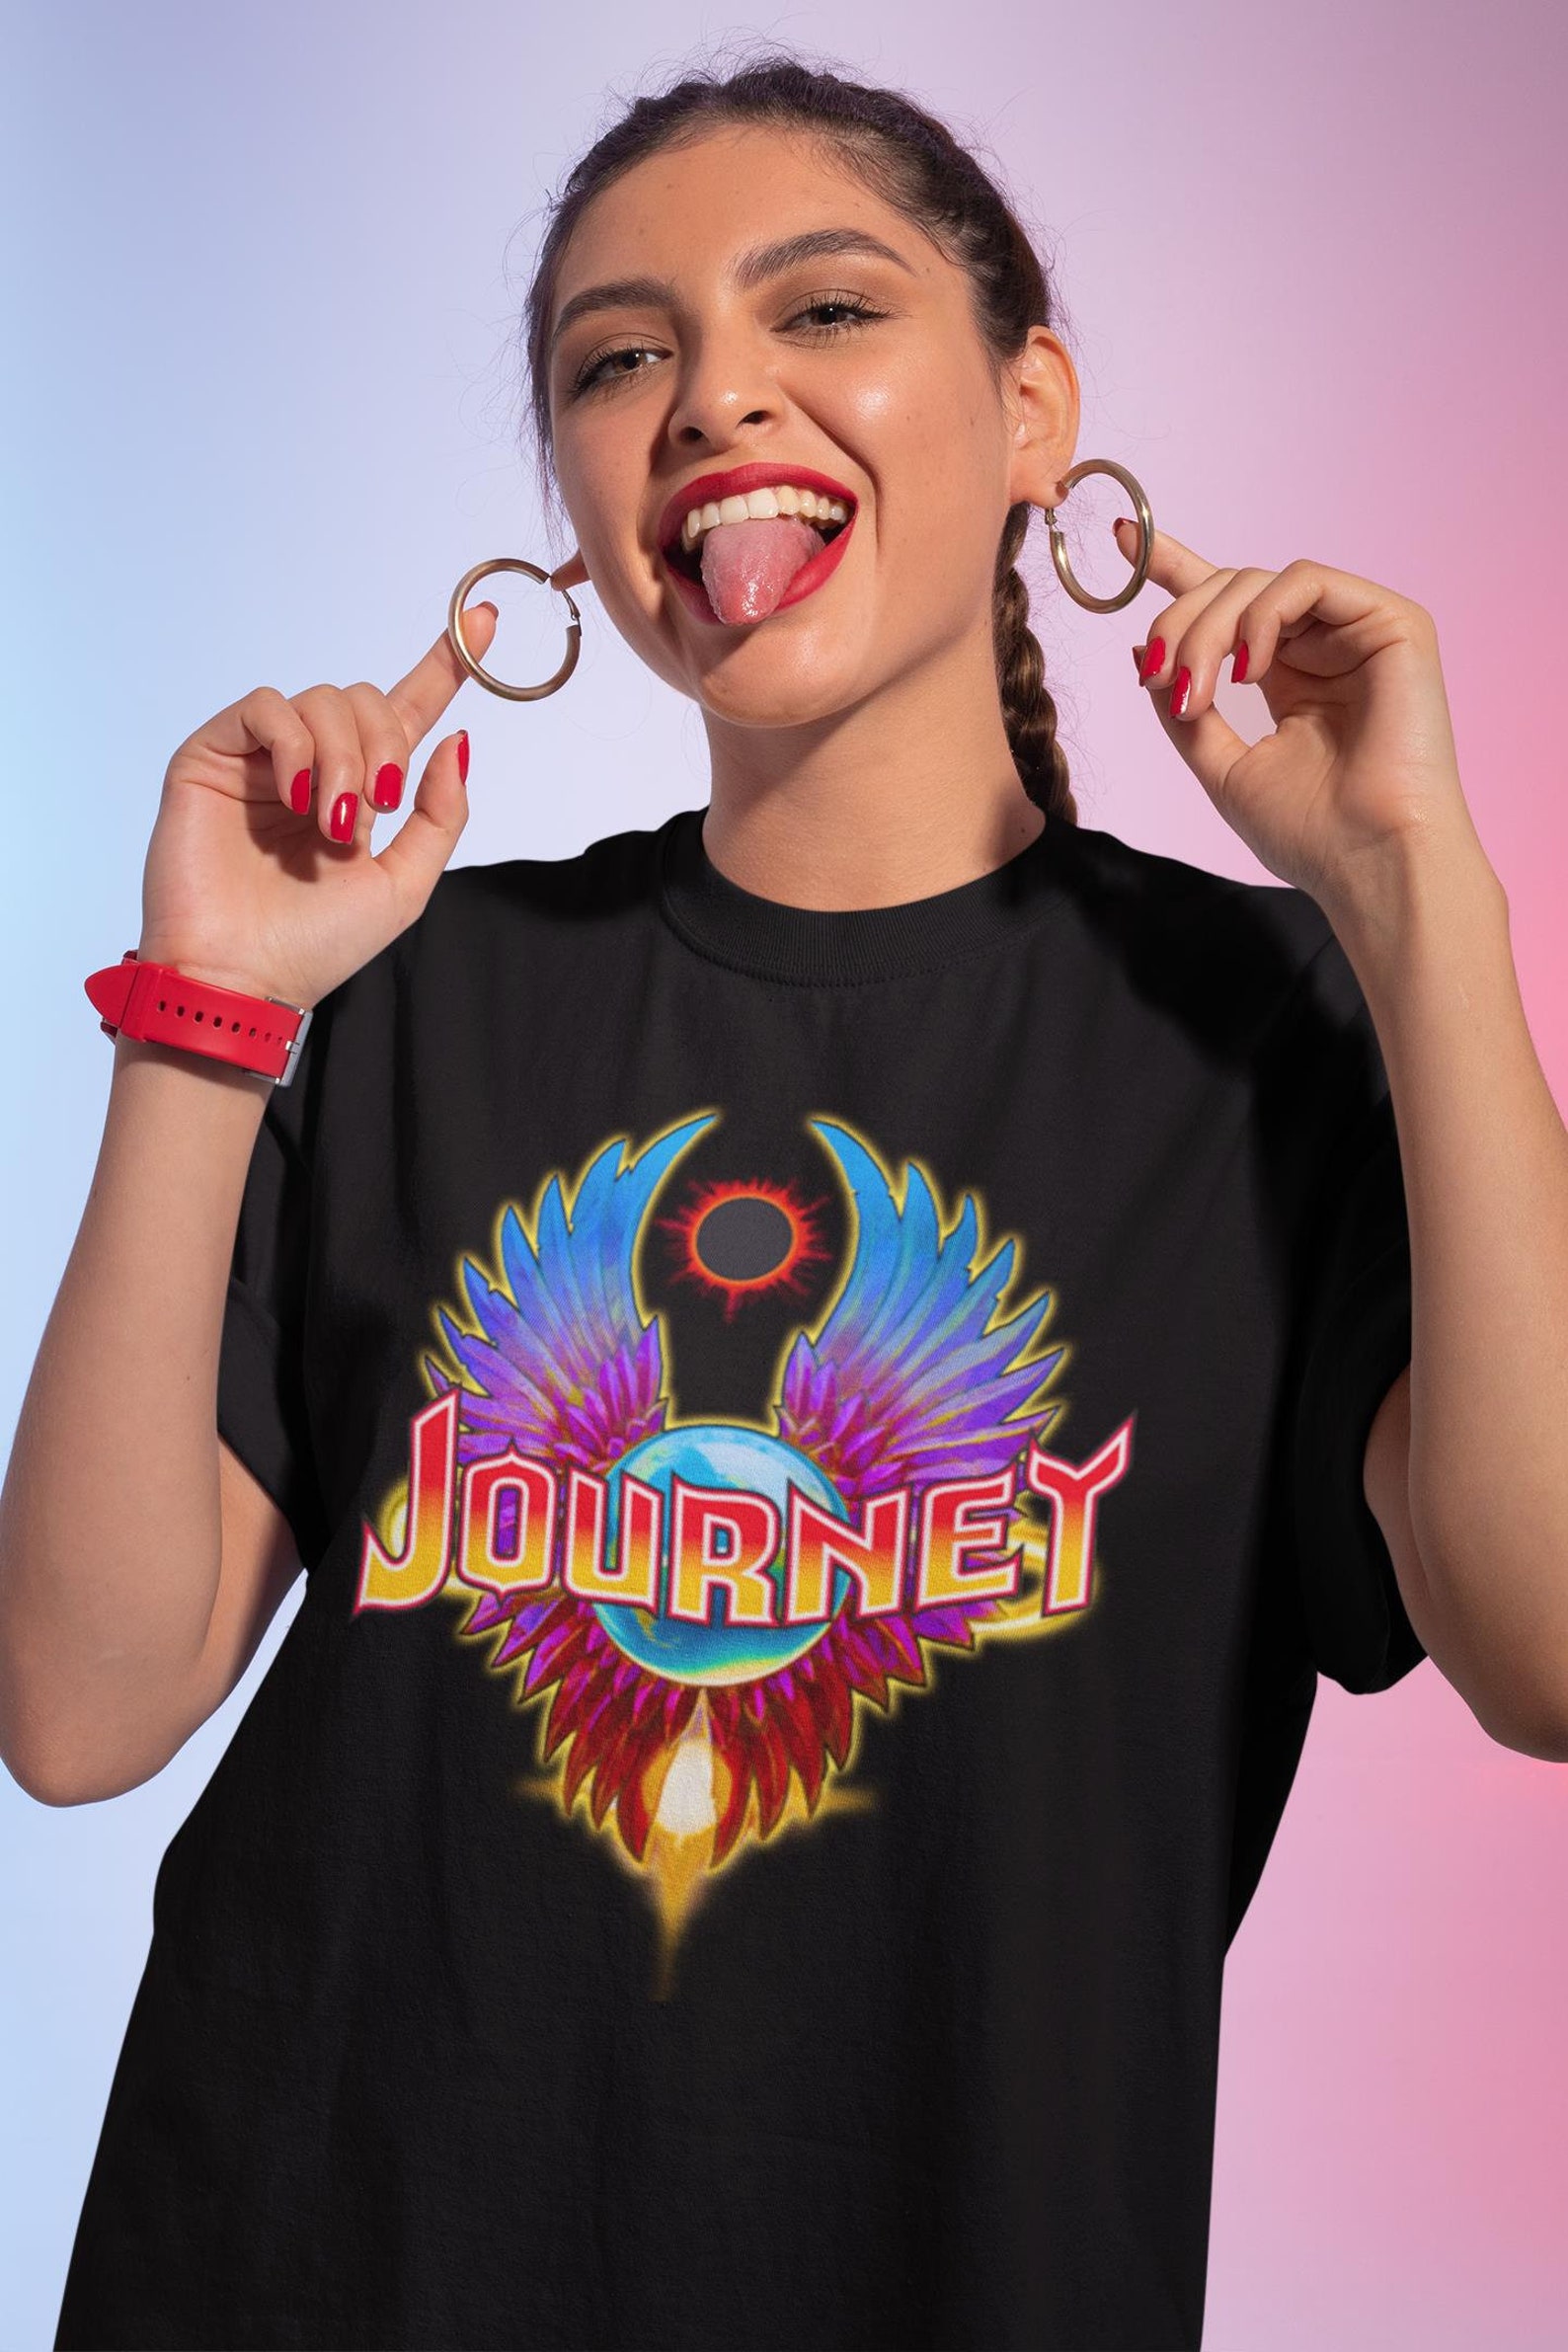 journey t shirts hot topic